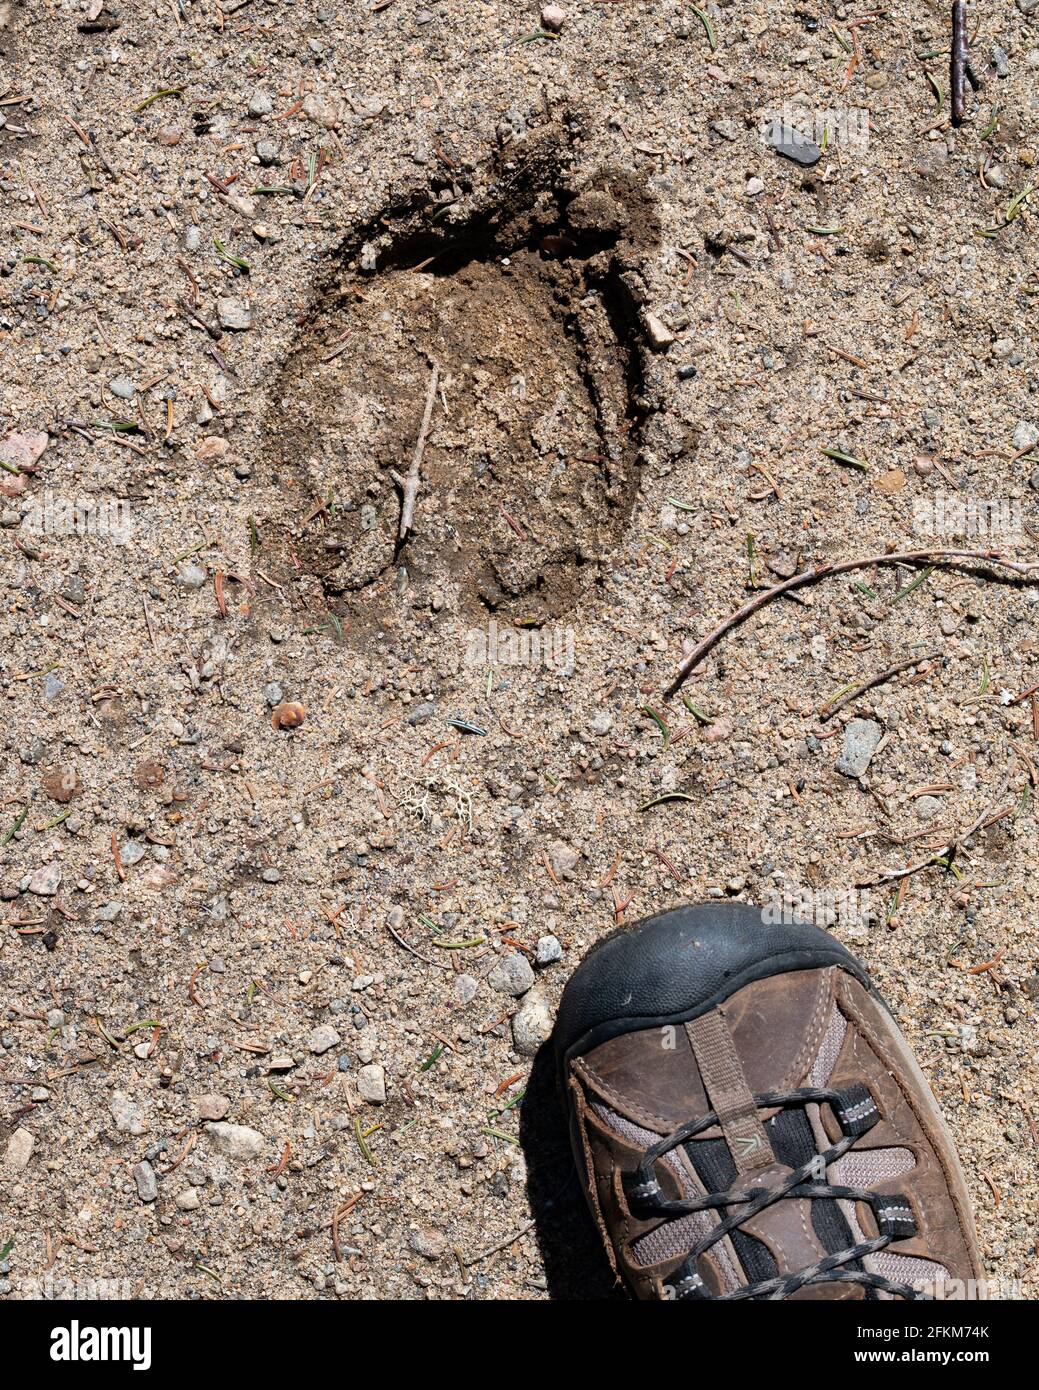 The track of a wild moose (Alces alces) in the sand on the edge of the forest in the Adirondack Mountains wilderness with a human foot for comparison. Stock Photo